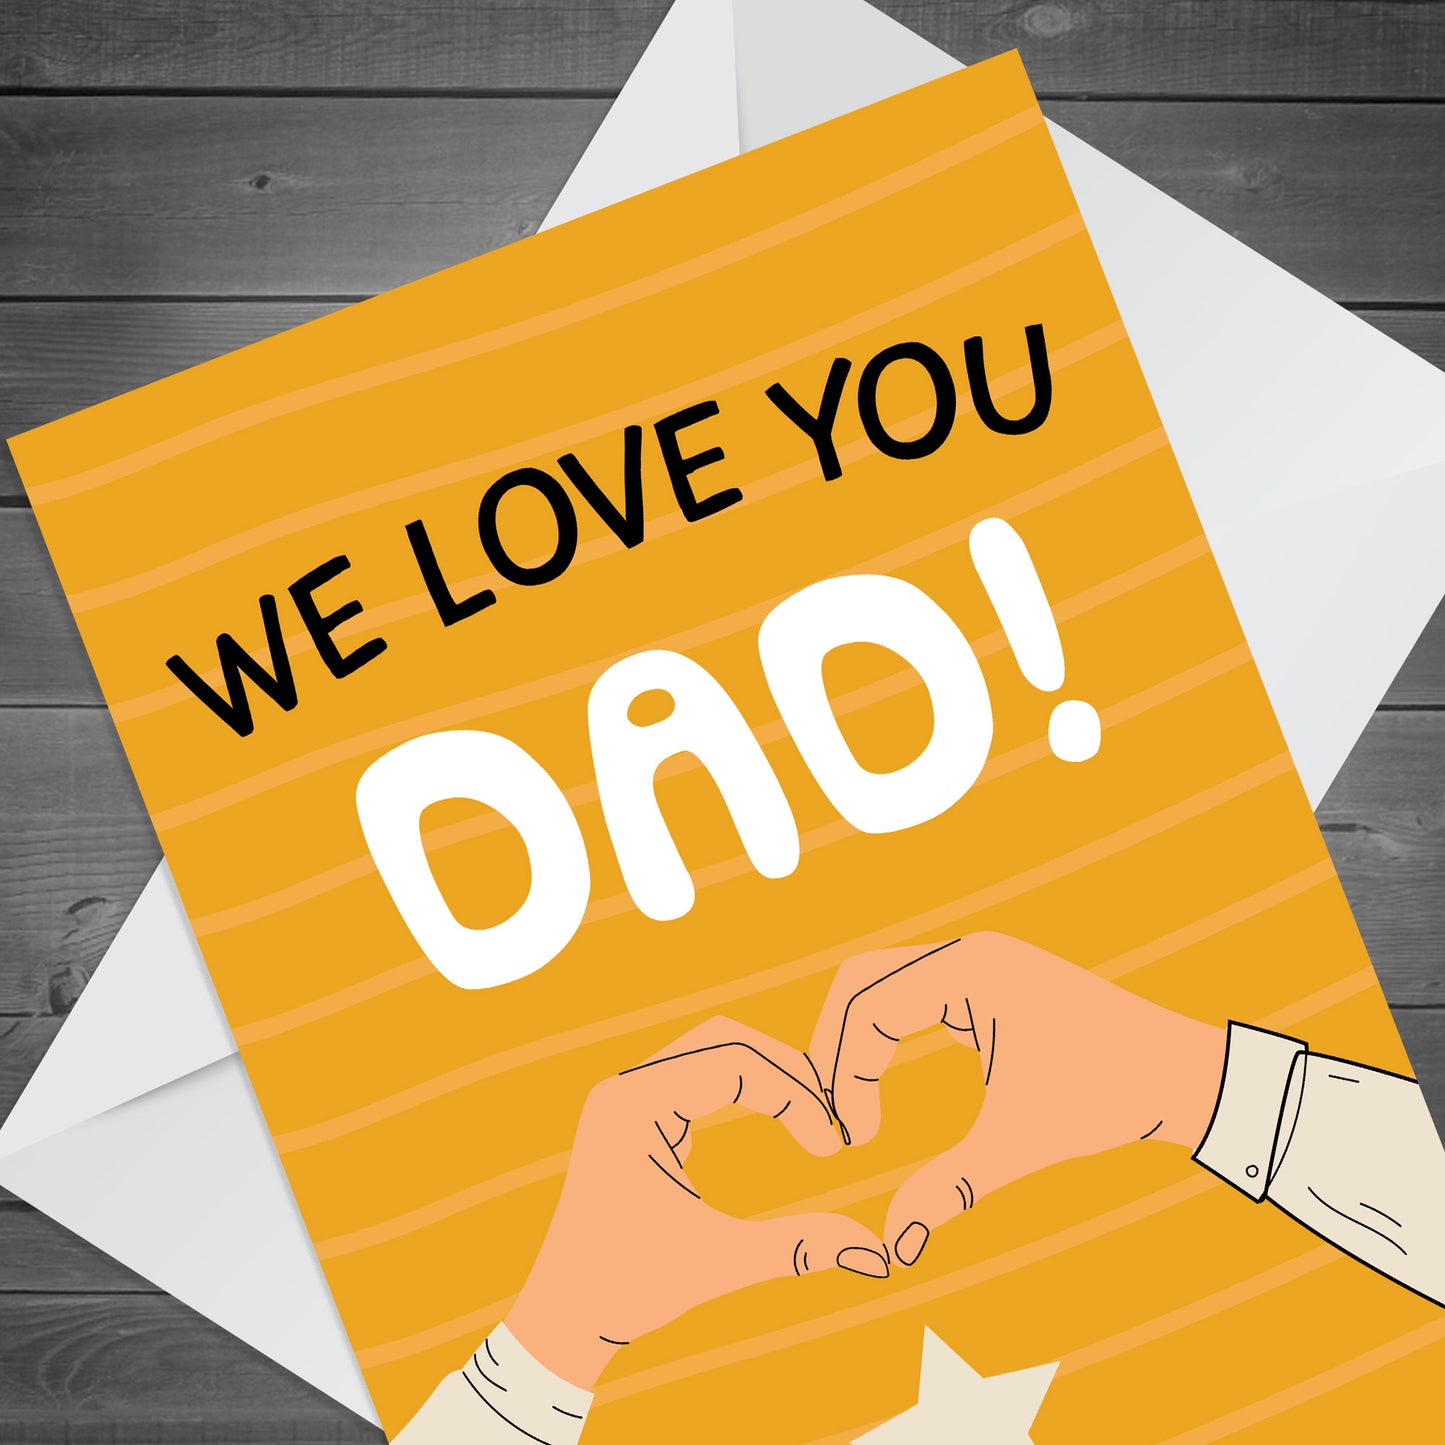 Fathers Day Card For Dad WE LOVE YOU DAD CARD Dad Birthday Card